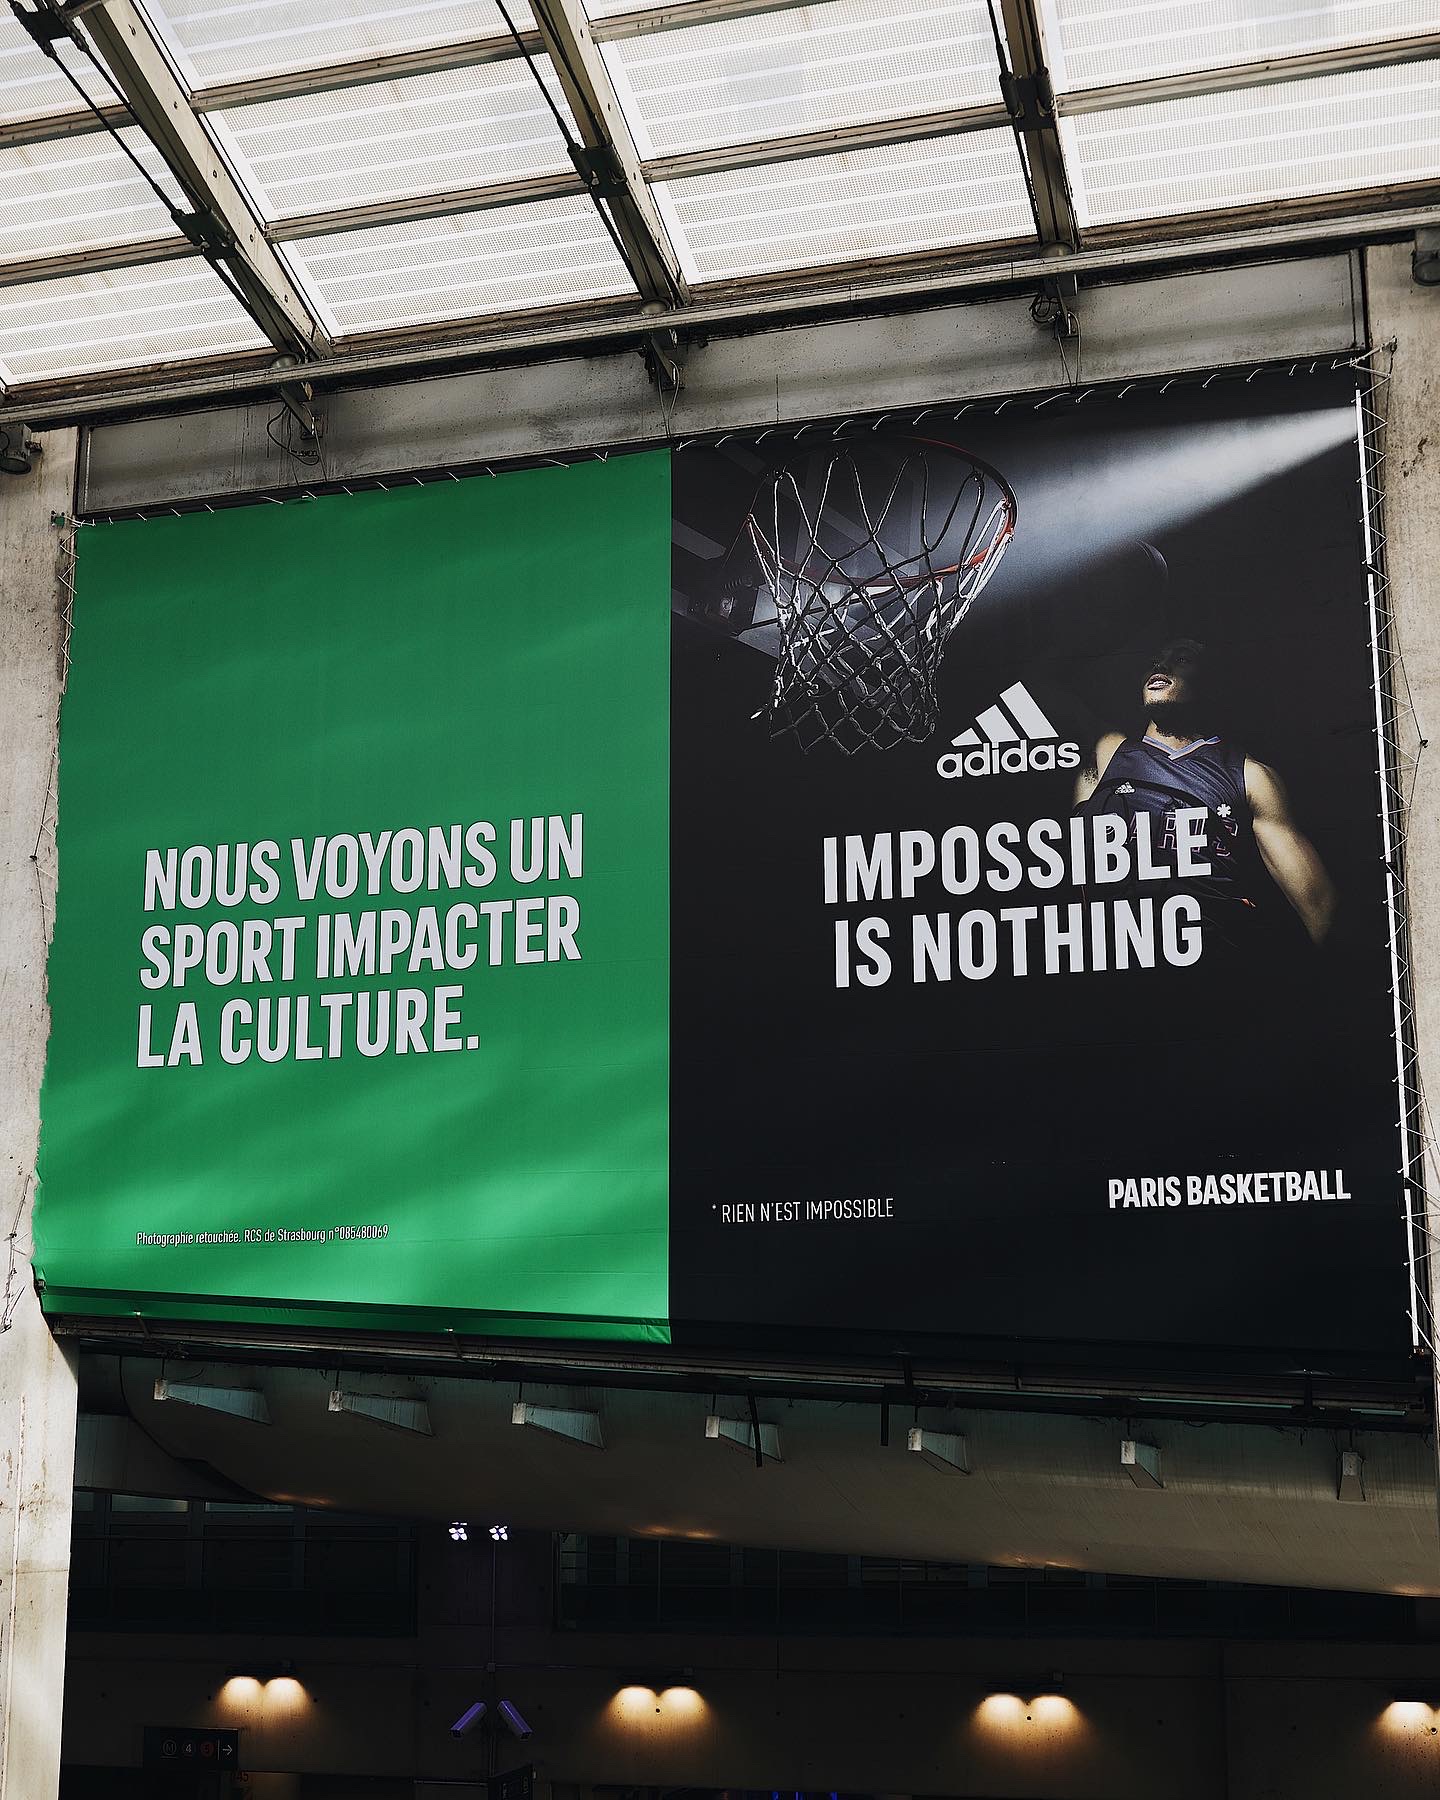 Adidas Impossible is Nothing Campaign - Melo